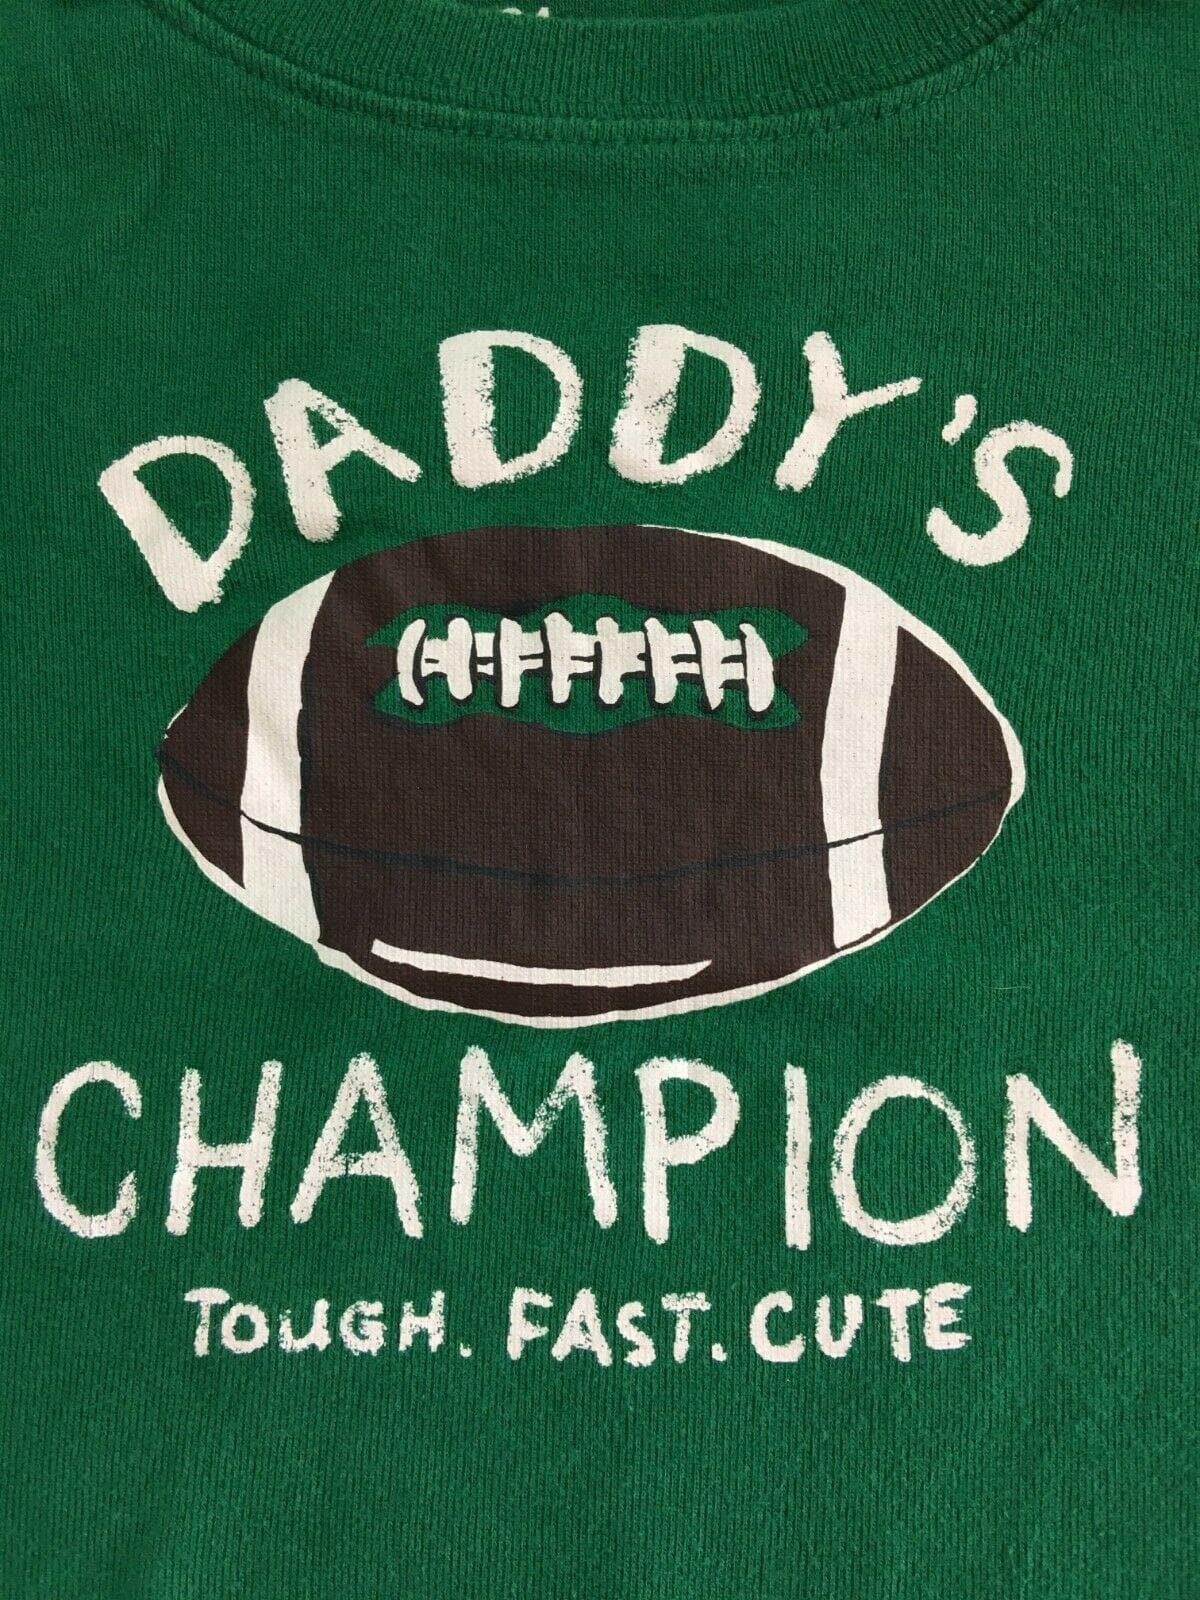 American Football "Daddy's Champion" L/S T-Shirt Toddler 24 Months